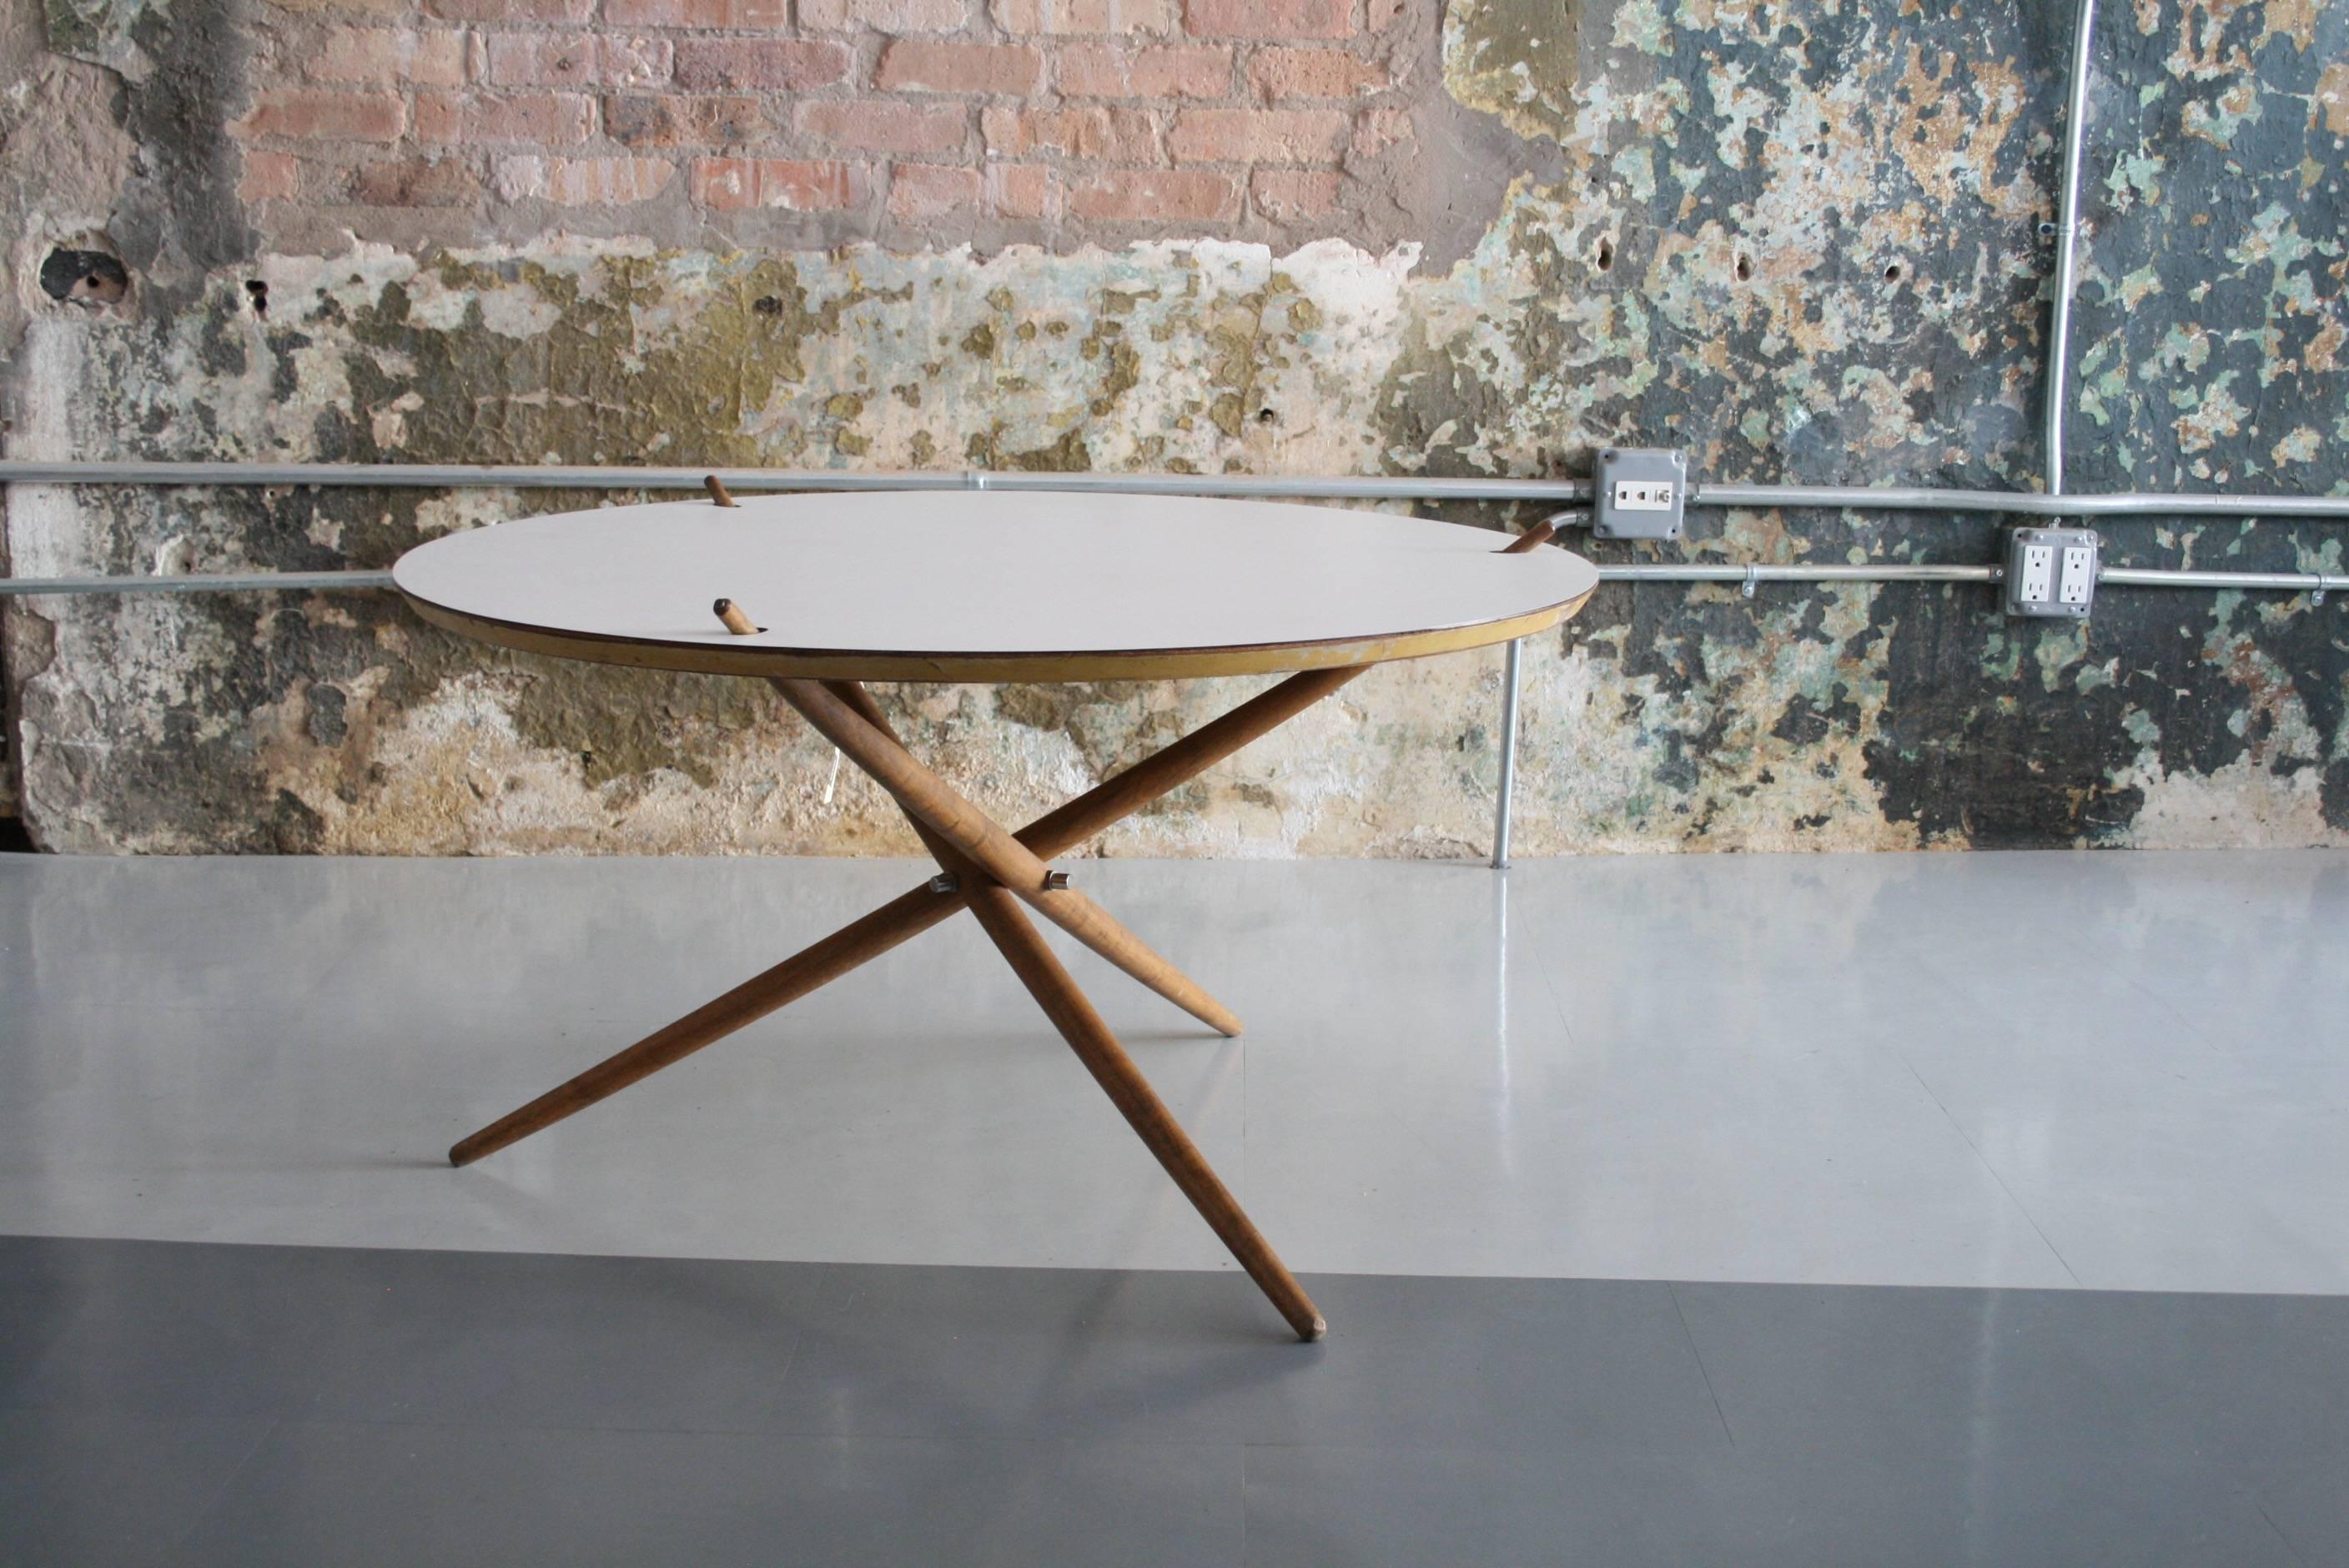 Rare early Knoll tripod coffee table designed by Hans Bellman in 1948. This is the only example of this form that we have ever seen on the market.

Dimensions: 36